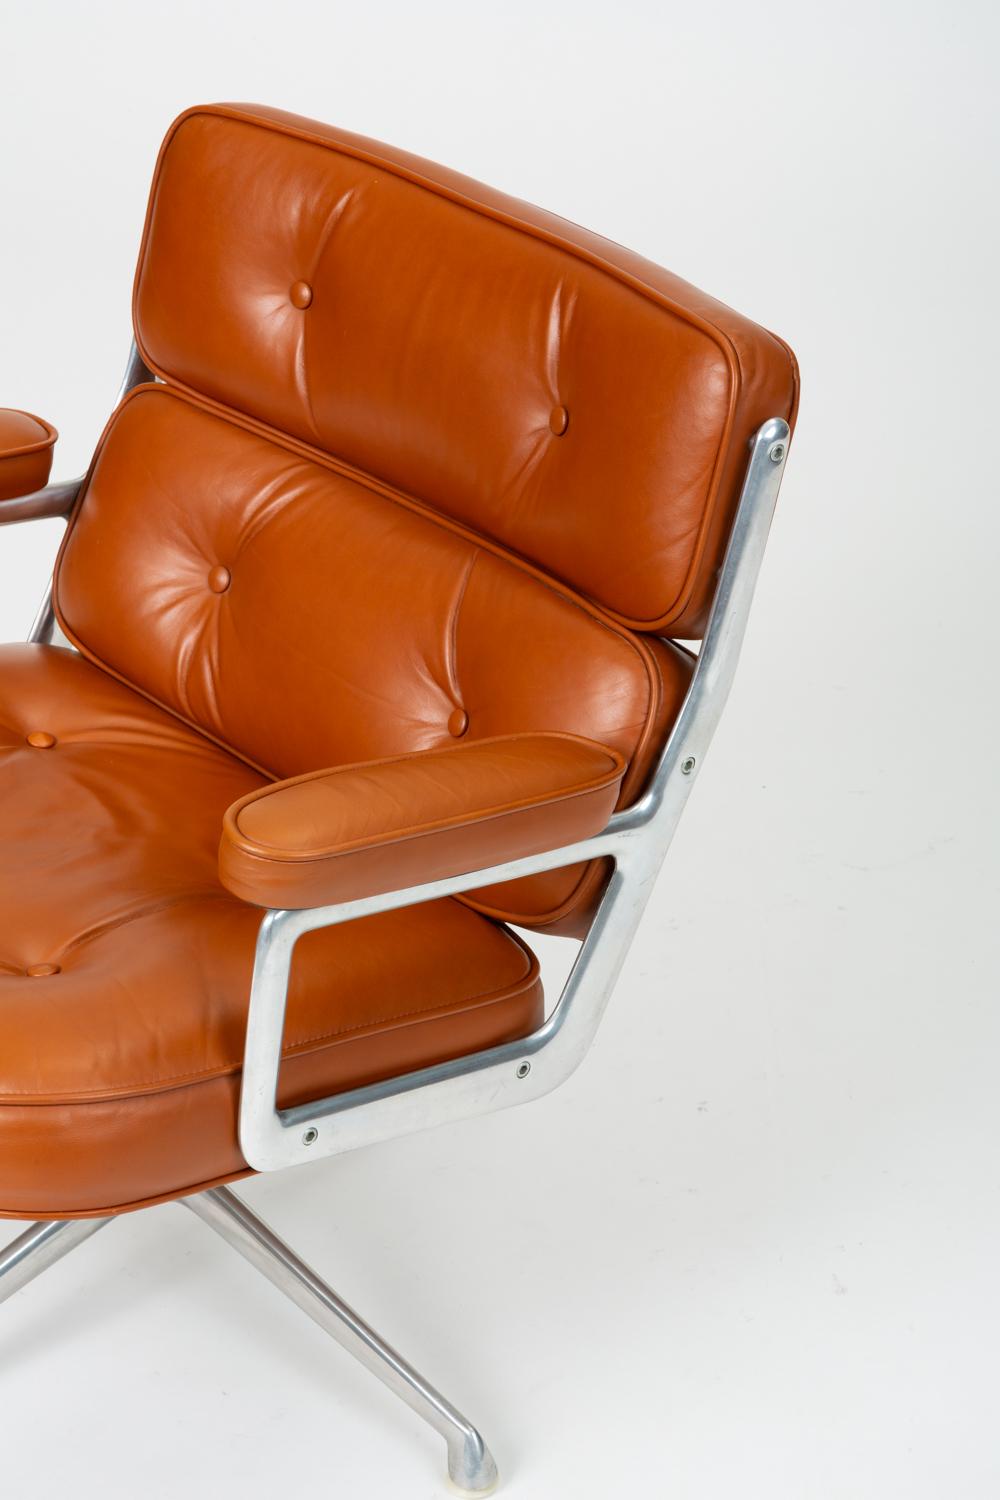 Ray and Charles Eames Time Life Lobby Chair in Cognac Leather 5